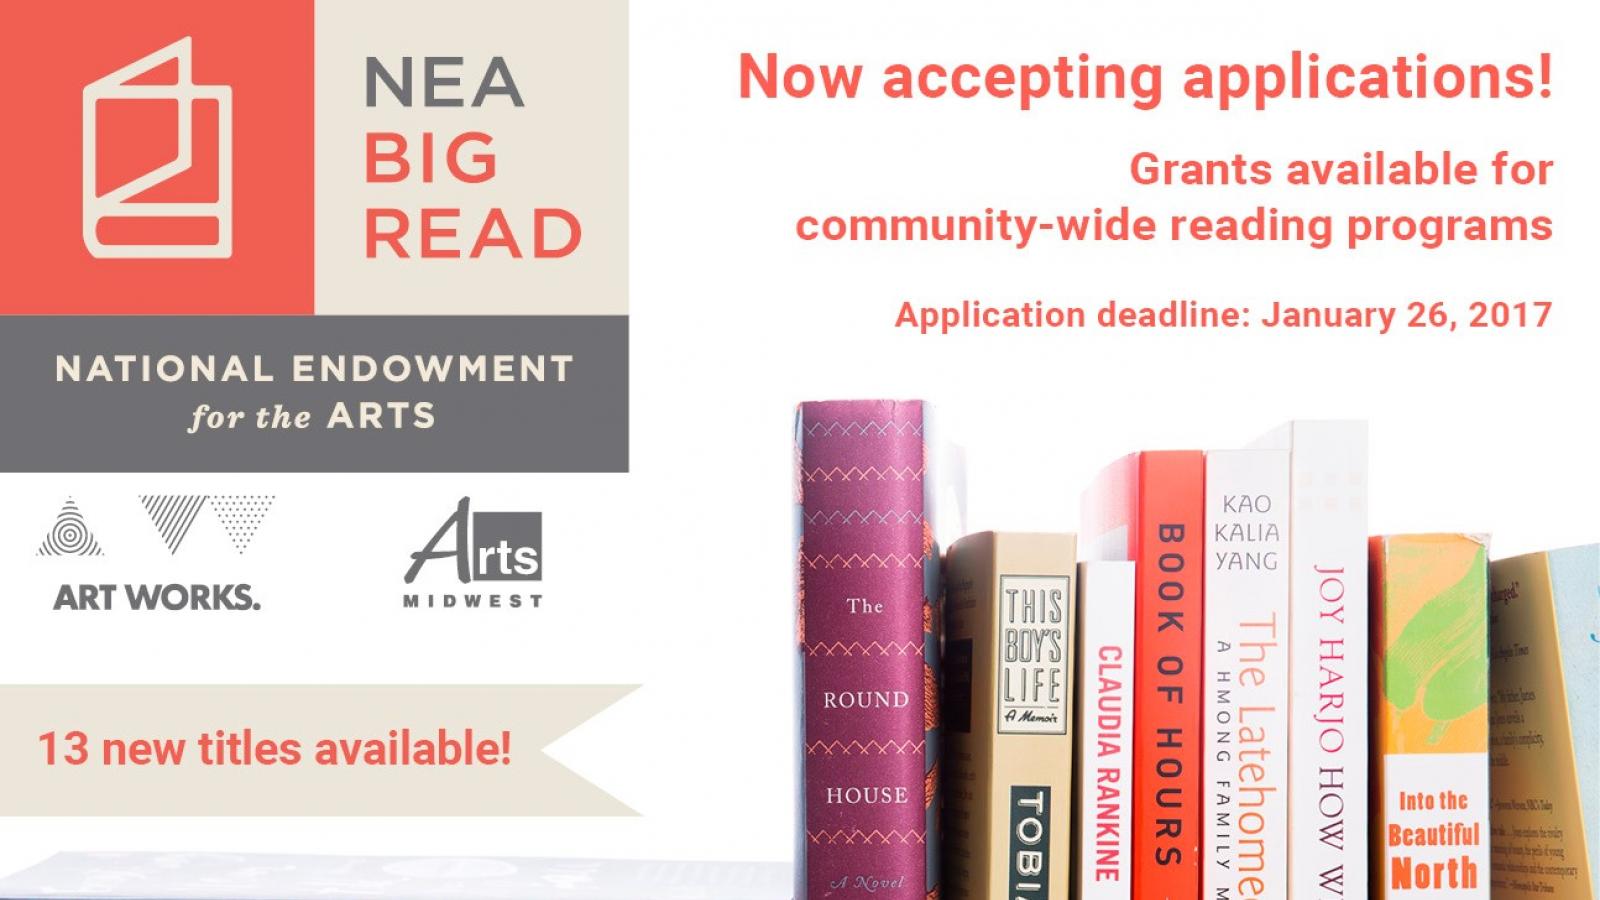 Pictures of book jackets for NEA Big Read books with text about application deadline.